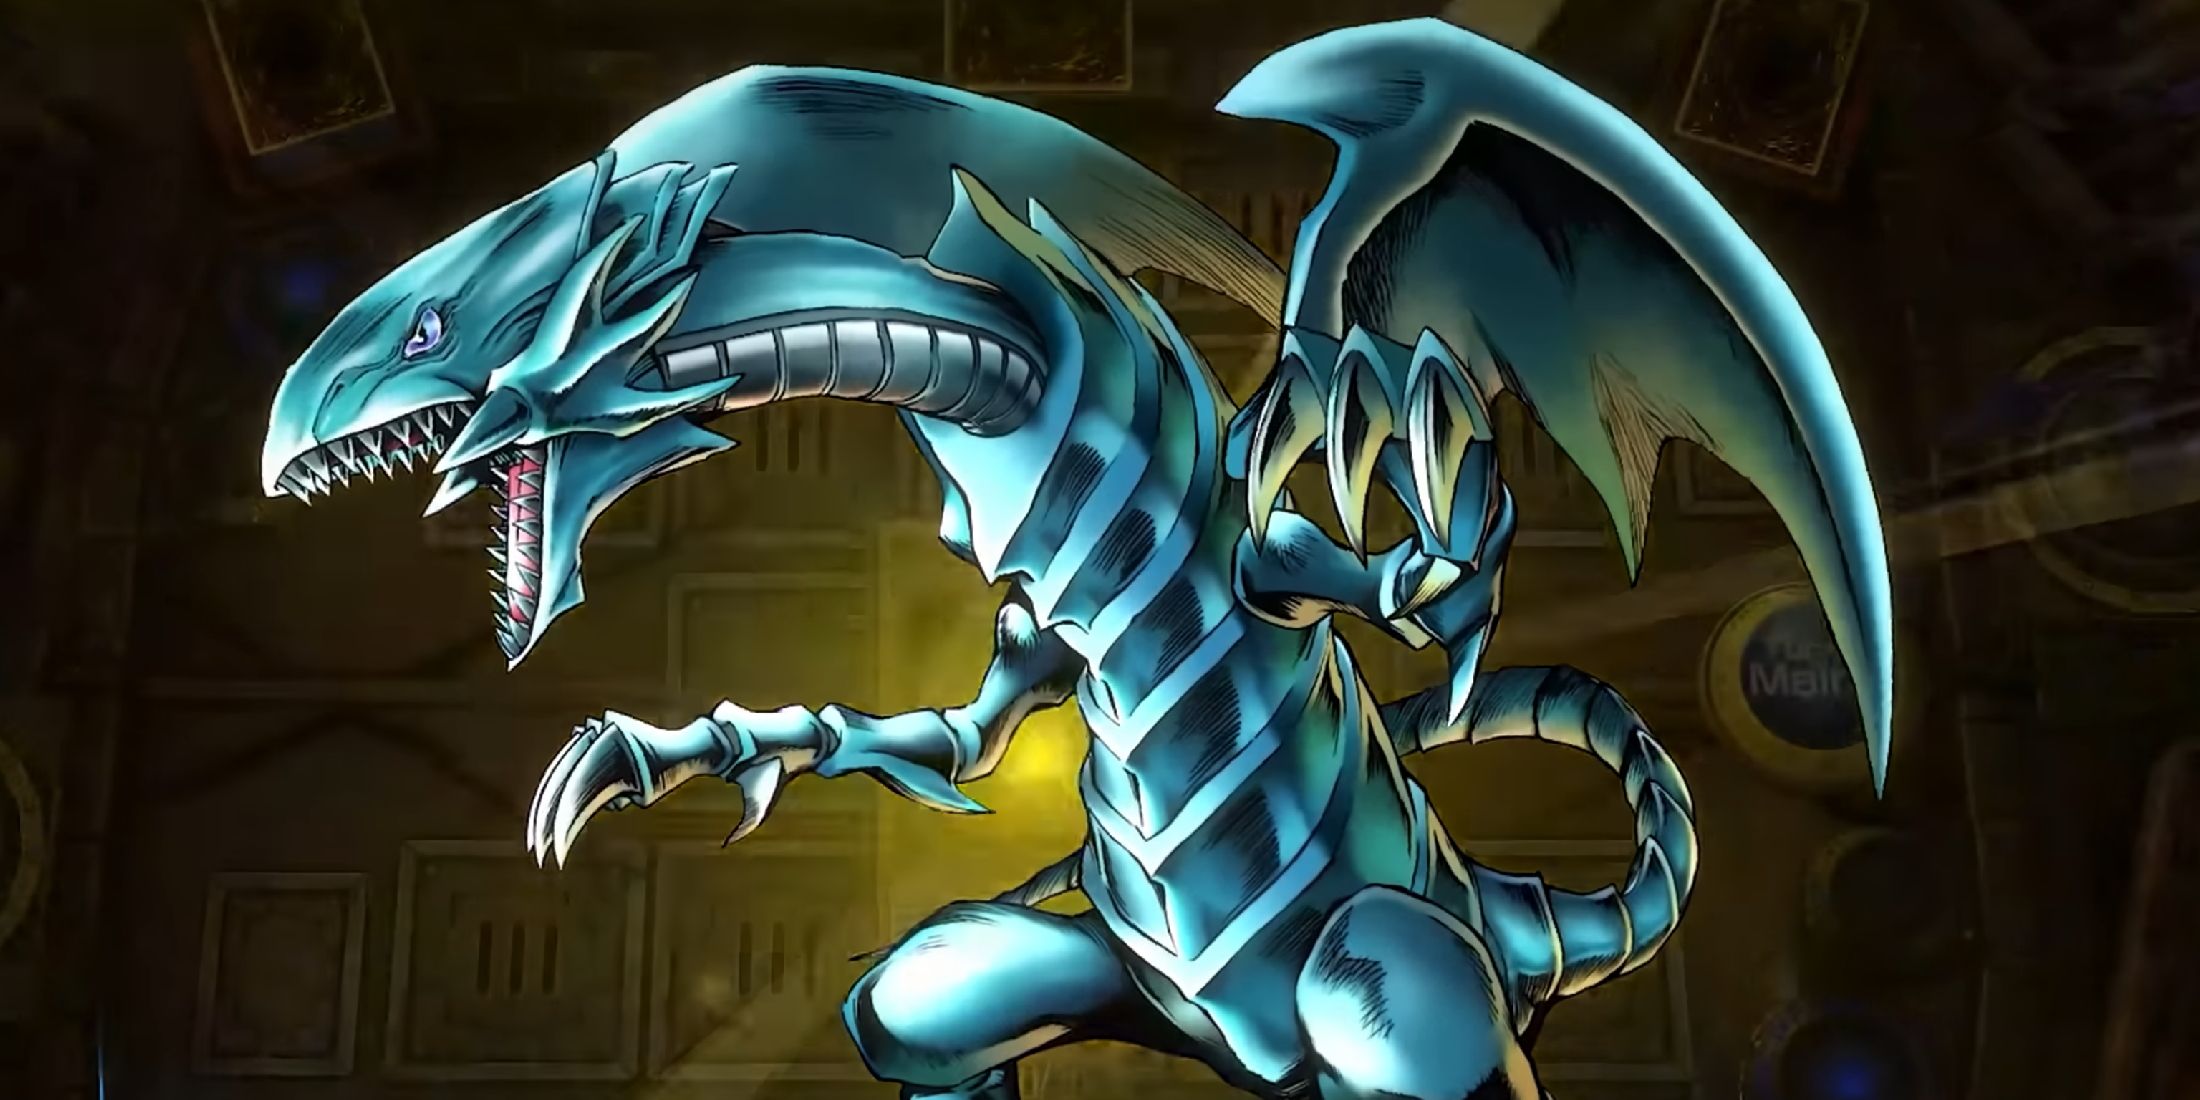 A screenshot from Yu-Gi-Oh Master Duel showing the summoning animation for the Blue-Eyes White Dragon.